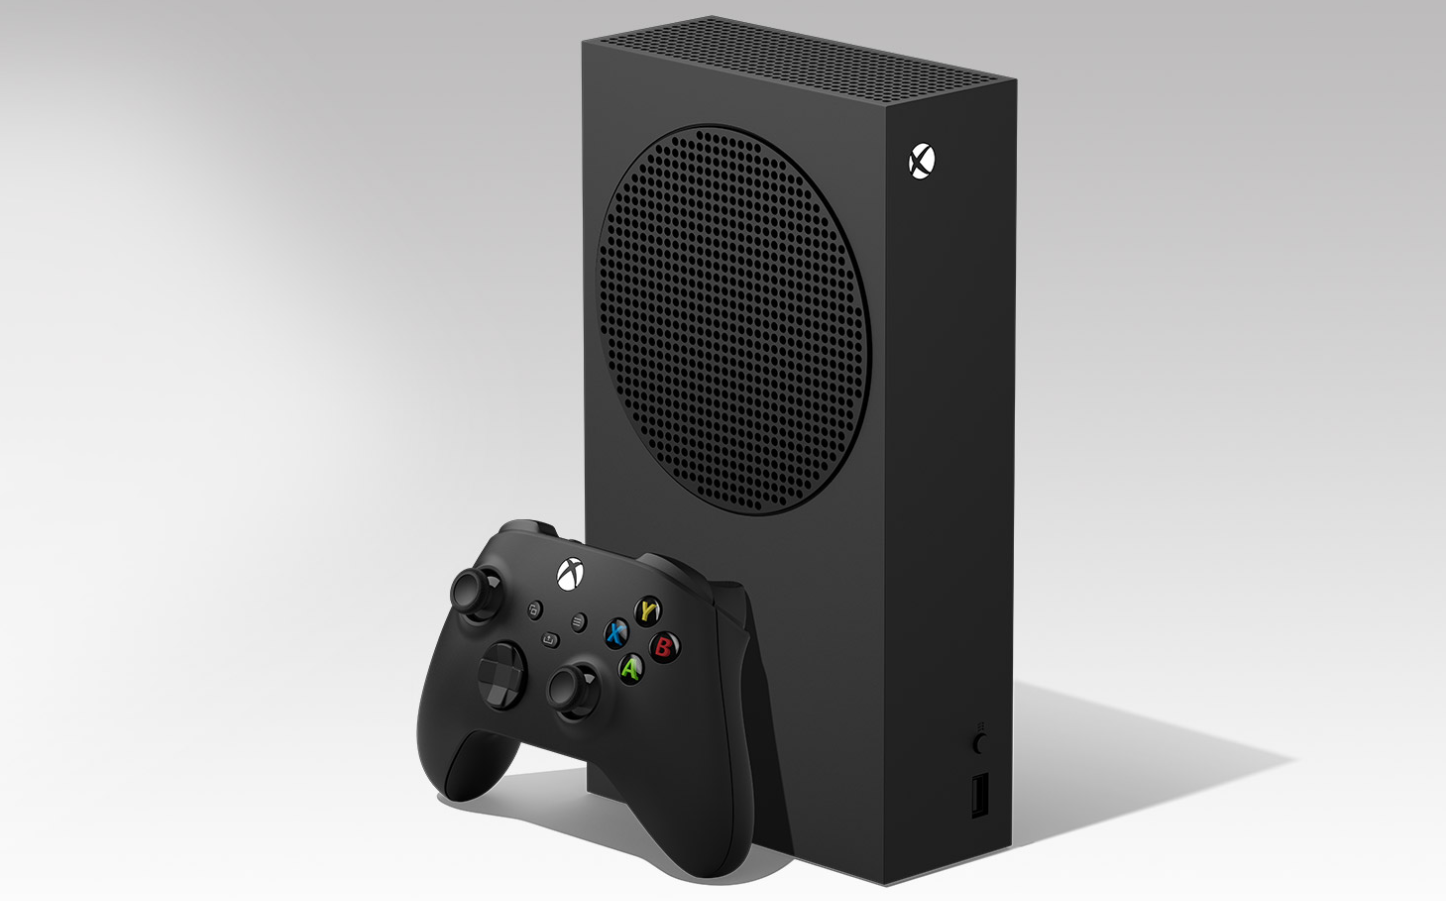 New_Xbox_series_s_1tb_standalone_console_sold_by_technomobi